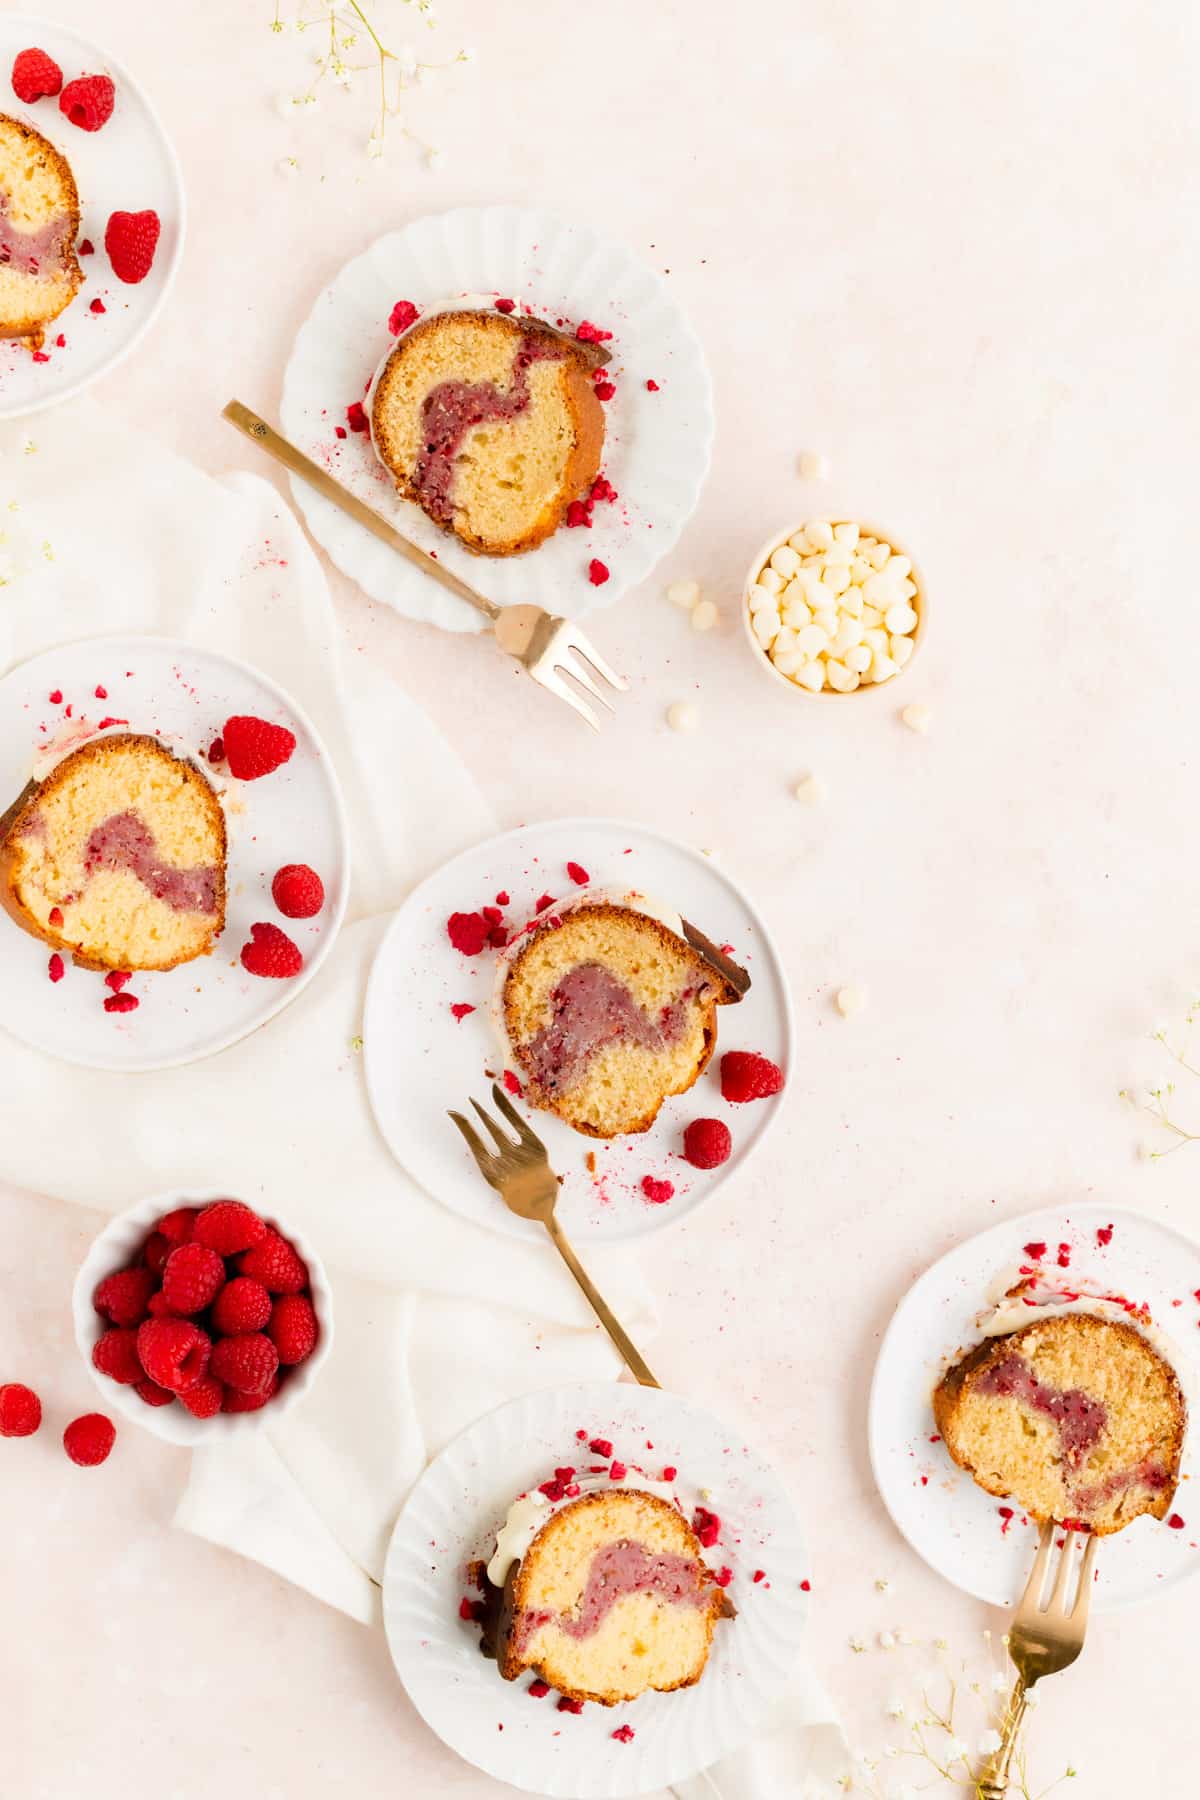 Six plated slices of white chocolate raspberry bundt cake with bowls of raspberries and chocolate chips.